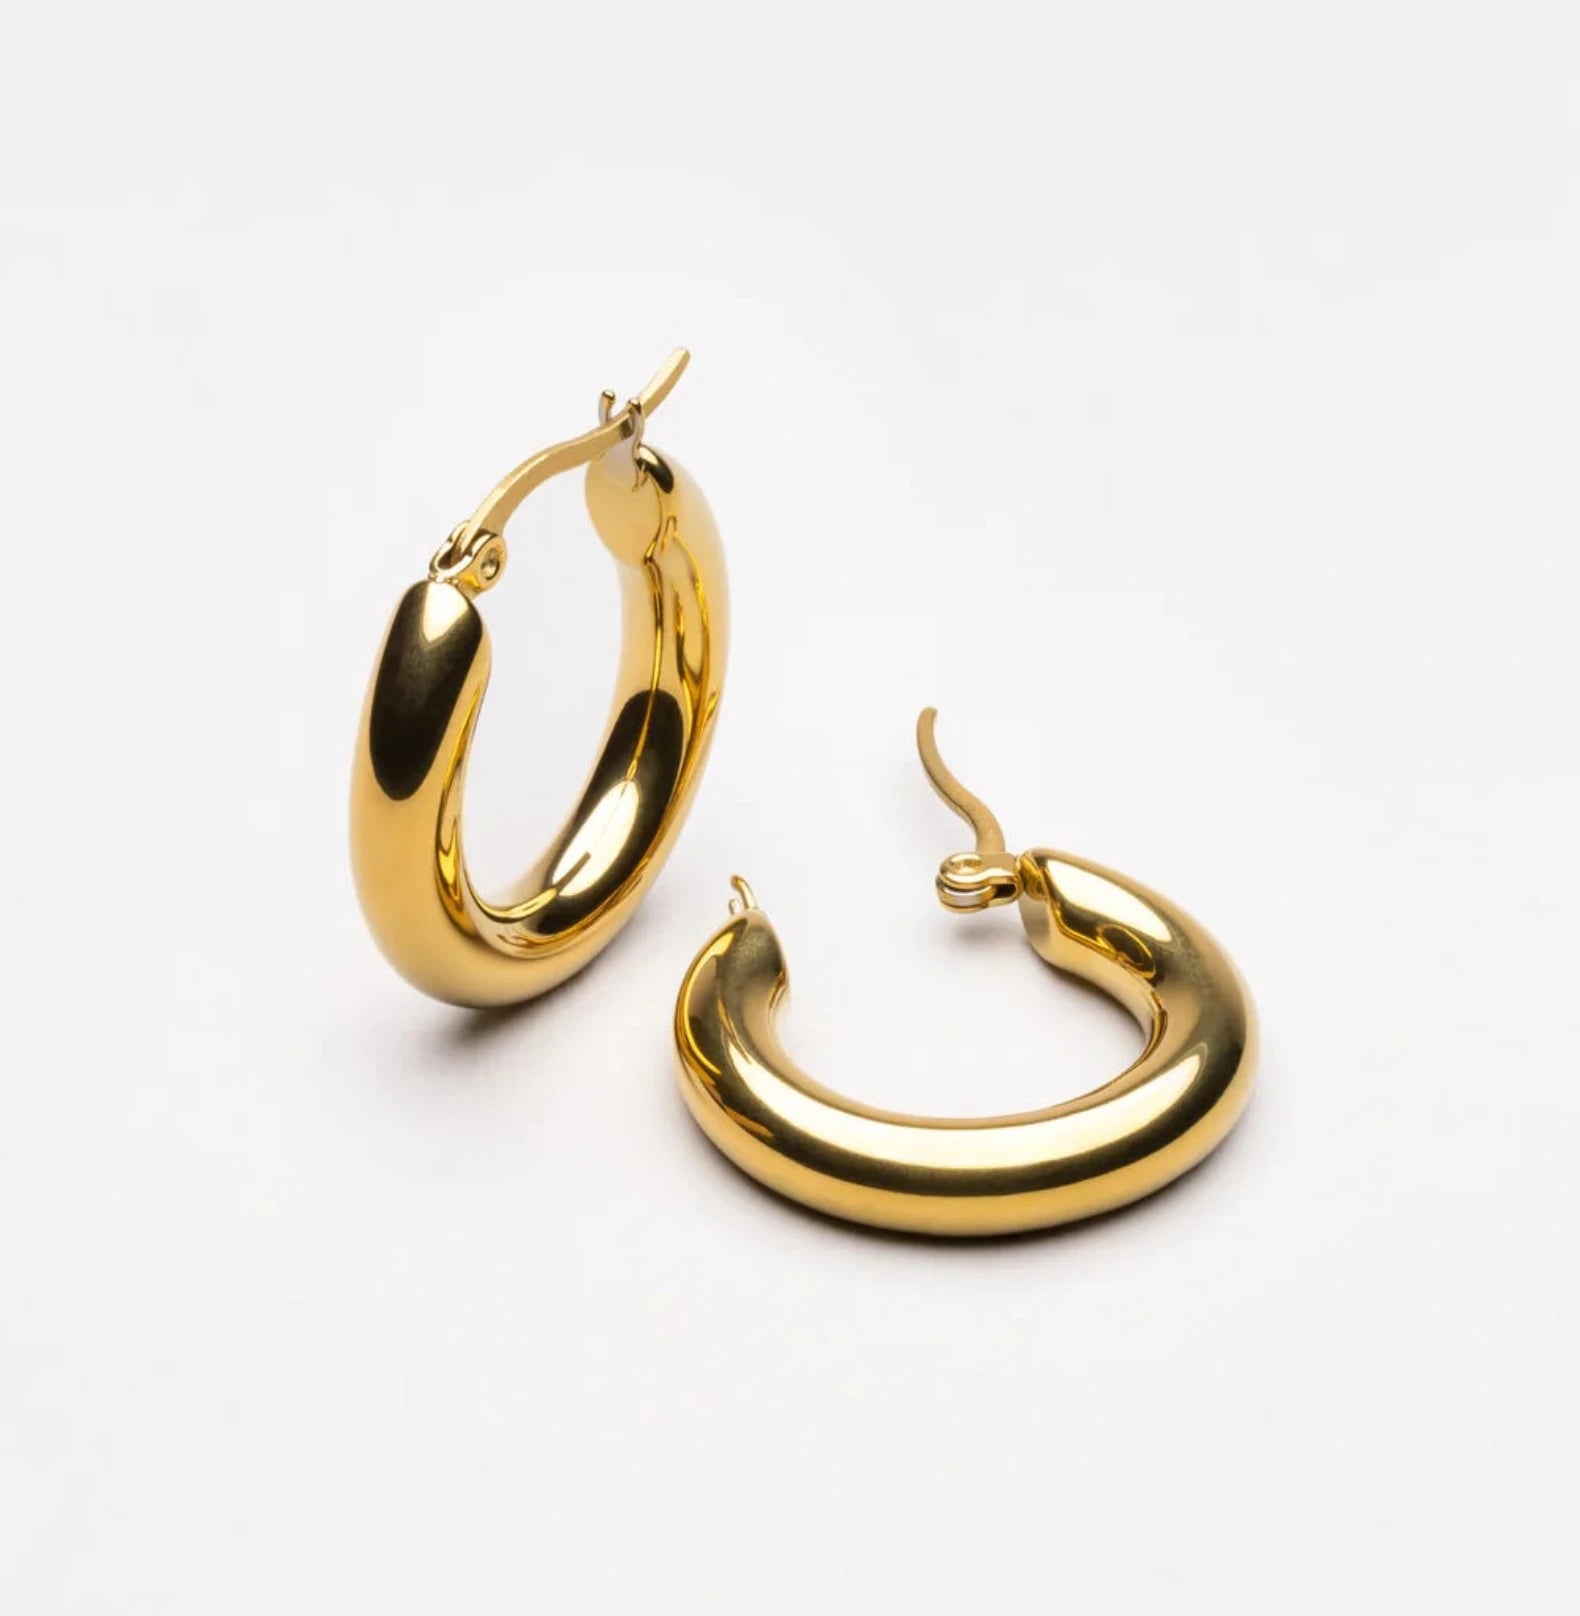 JANE HOOP EARRINGS earing Yubama Jewelry Online Store - The Elegant Designs of Gold and Silver ! 